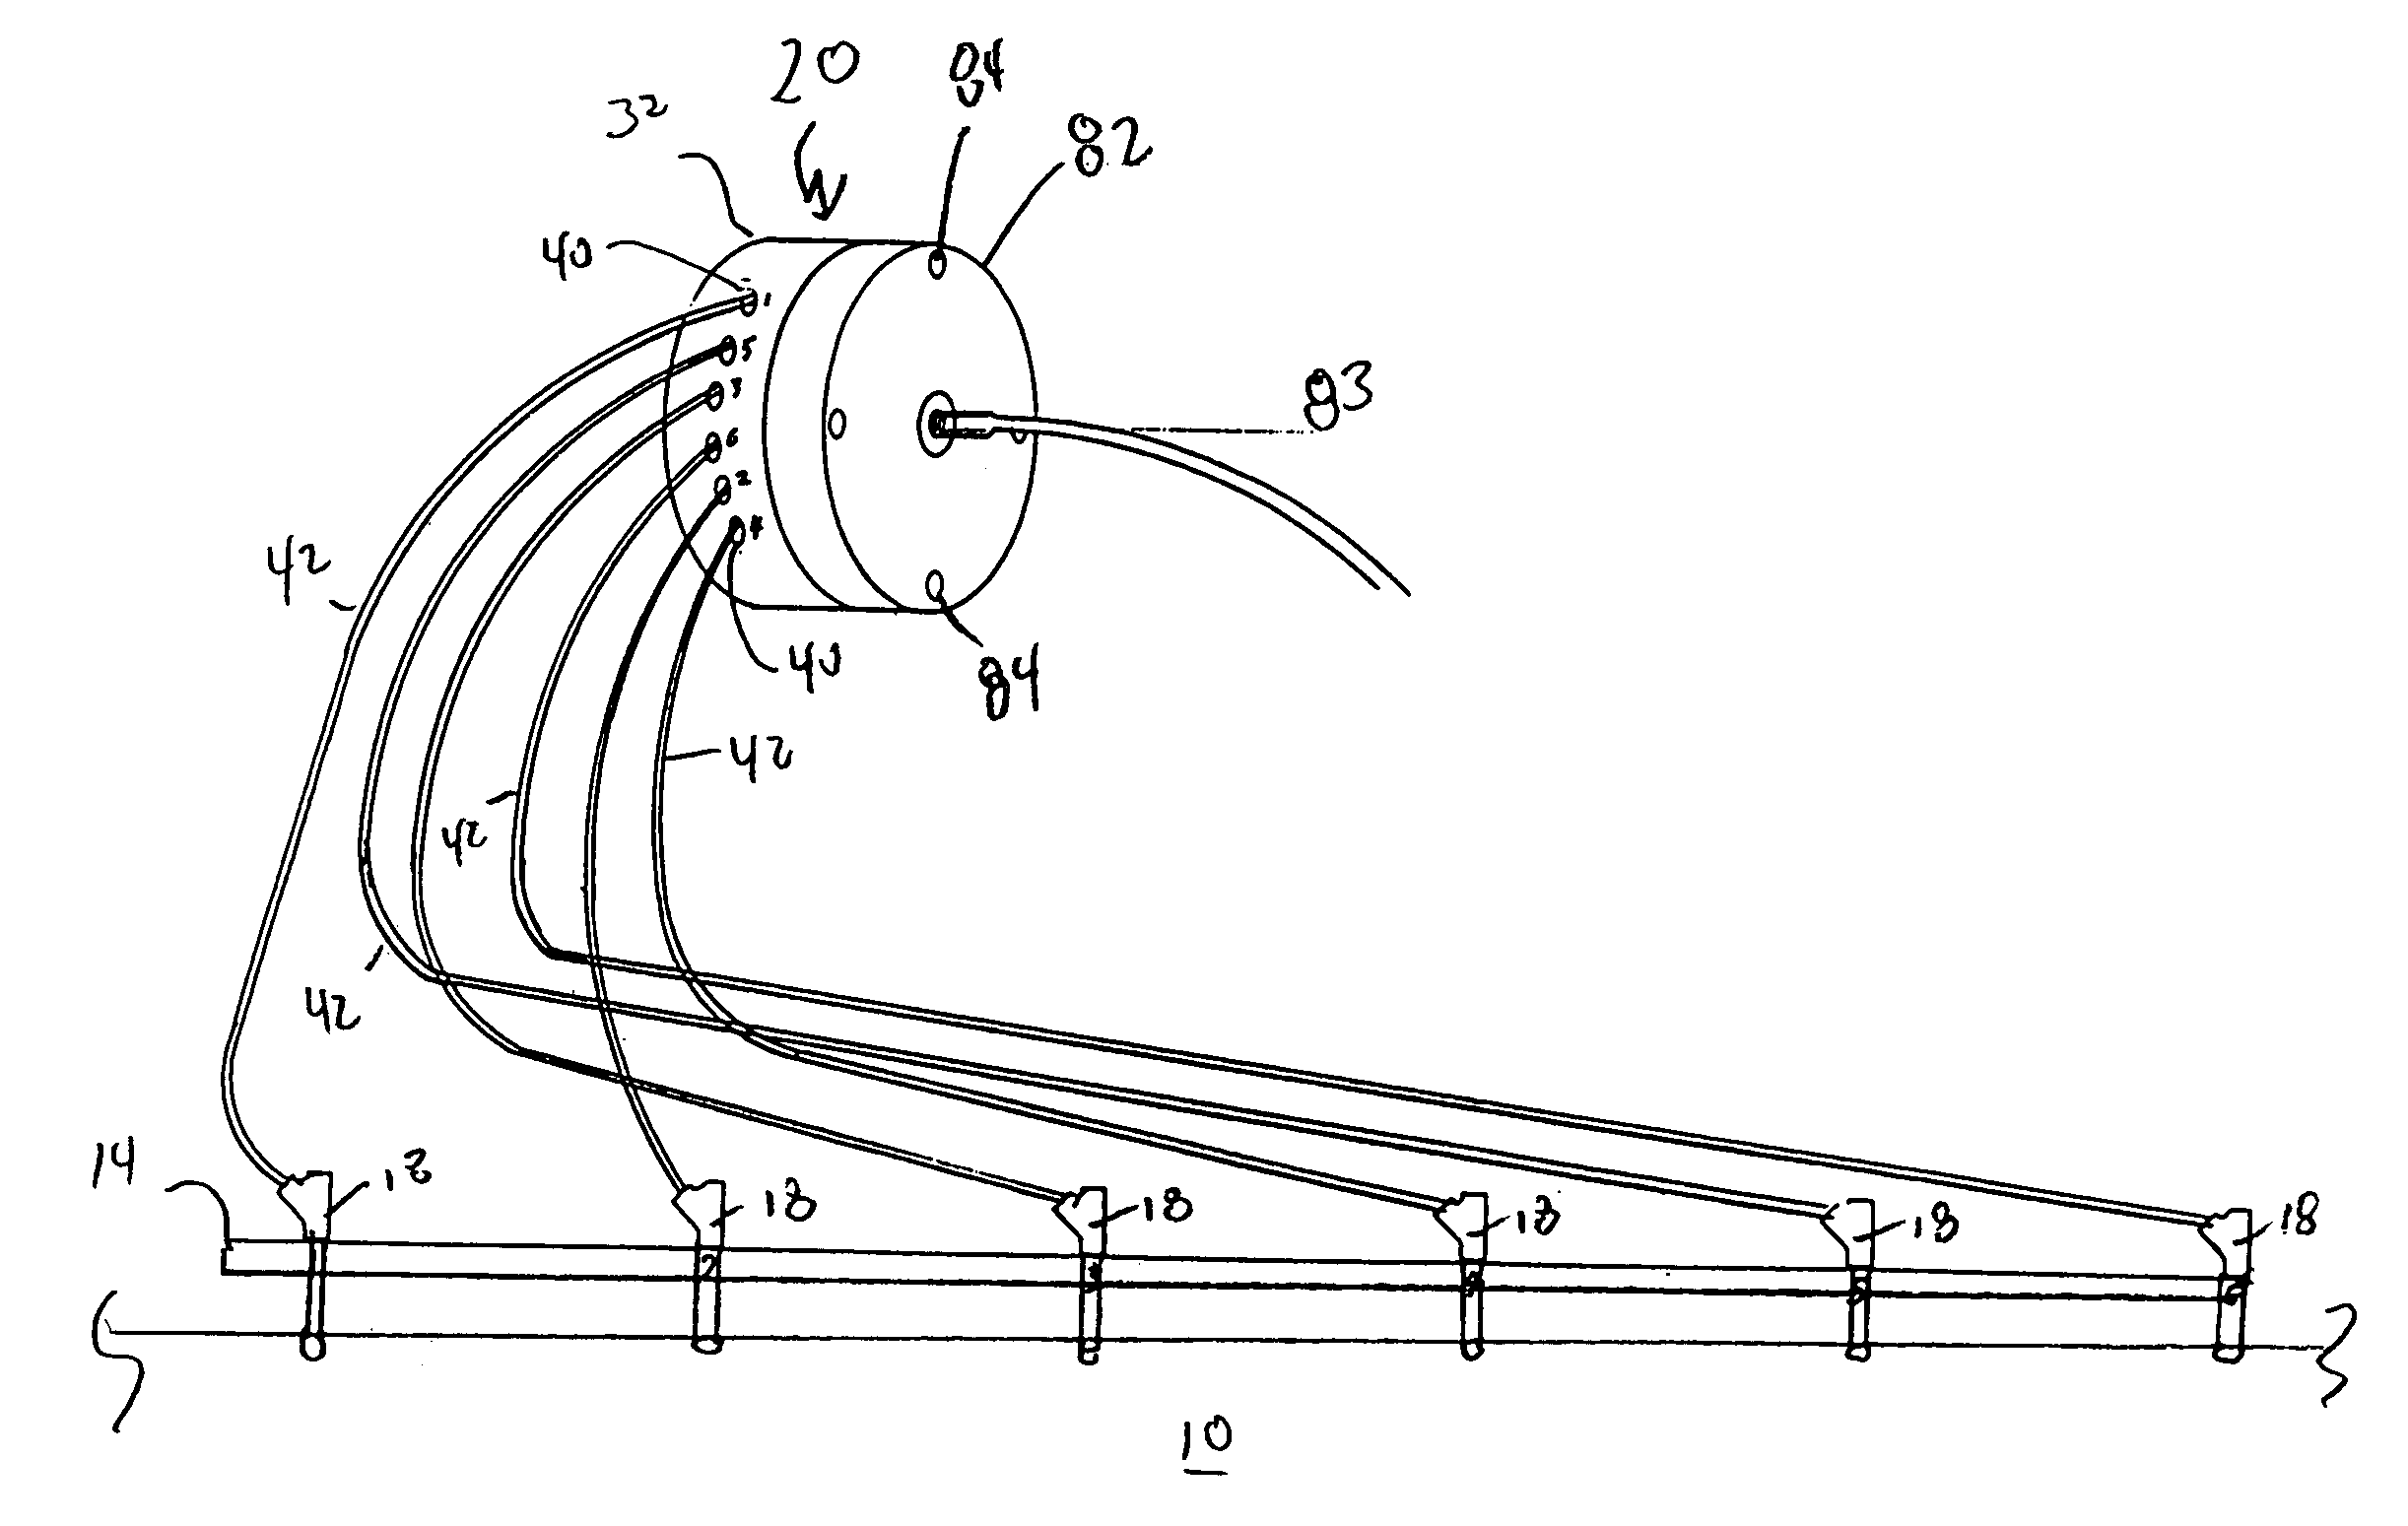 Sequential injection lubrication system for a spherical rotary valve internal combustion engine operating on natural gas or alternative fuels